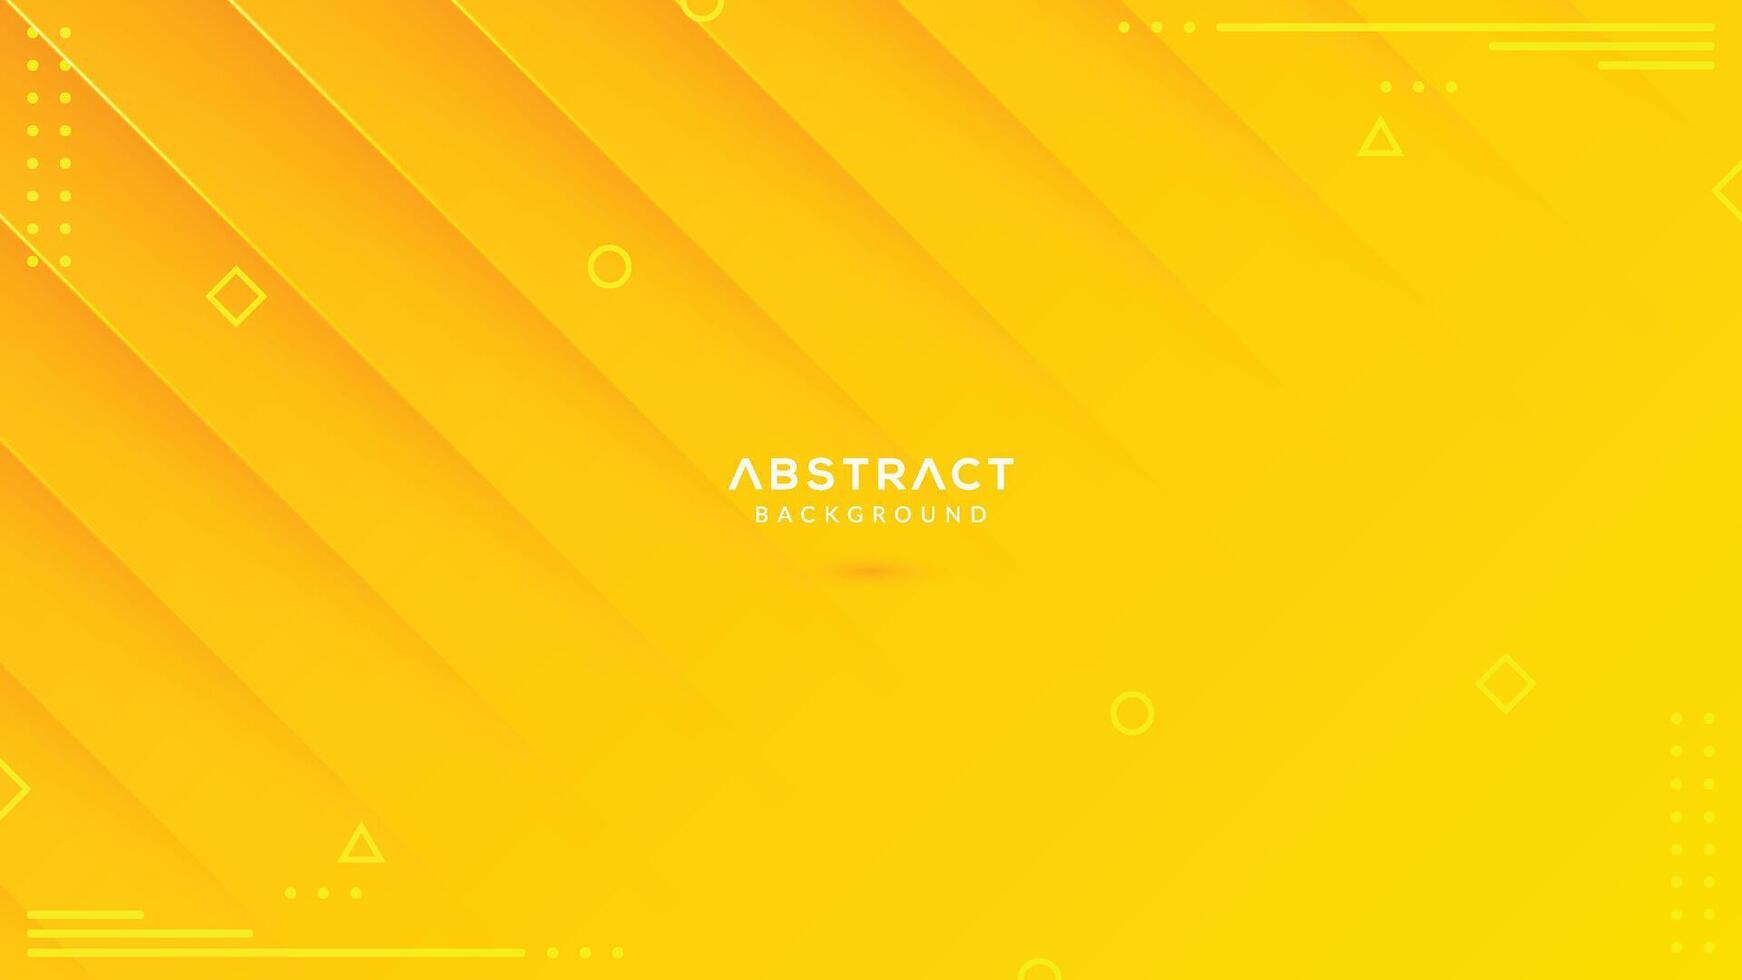 Abstract yellow light background with scratches effect vector